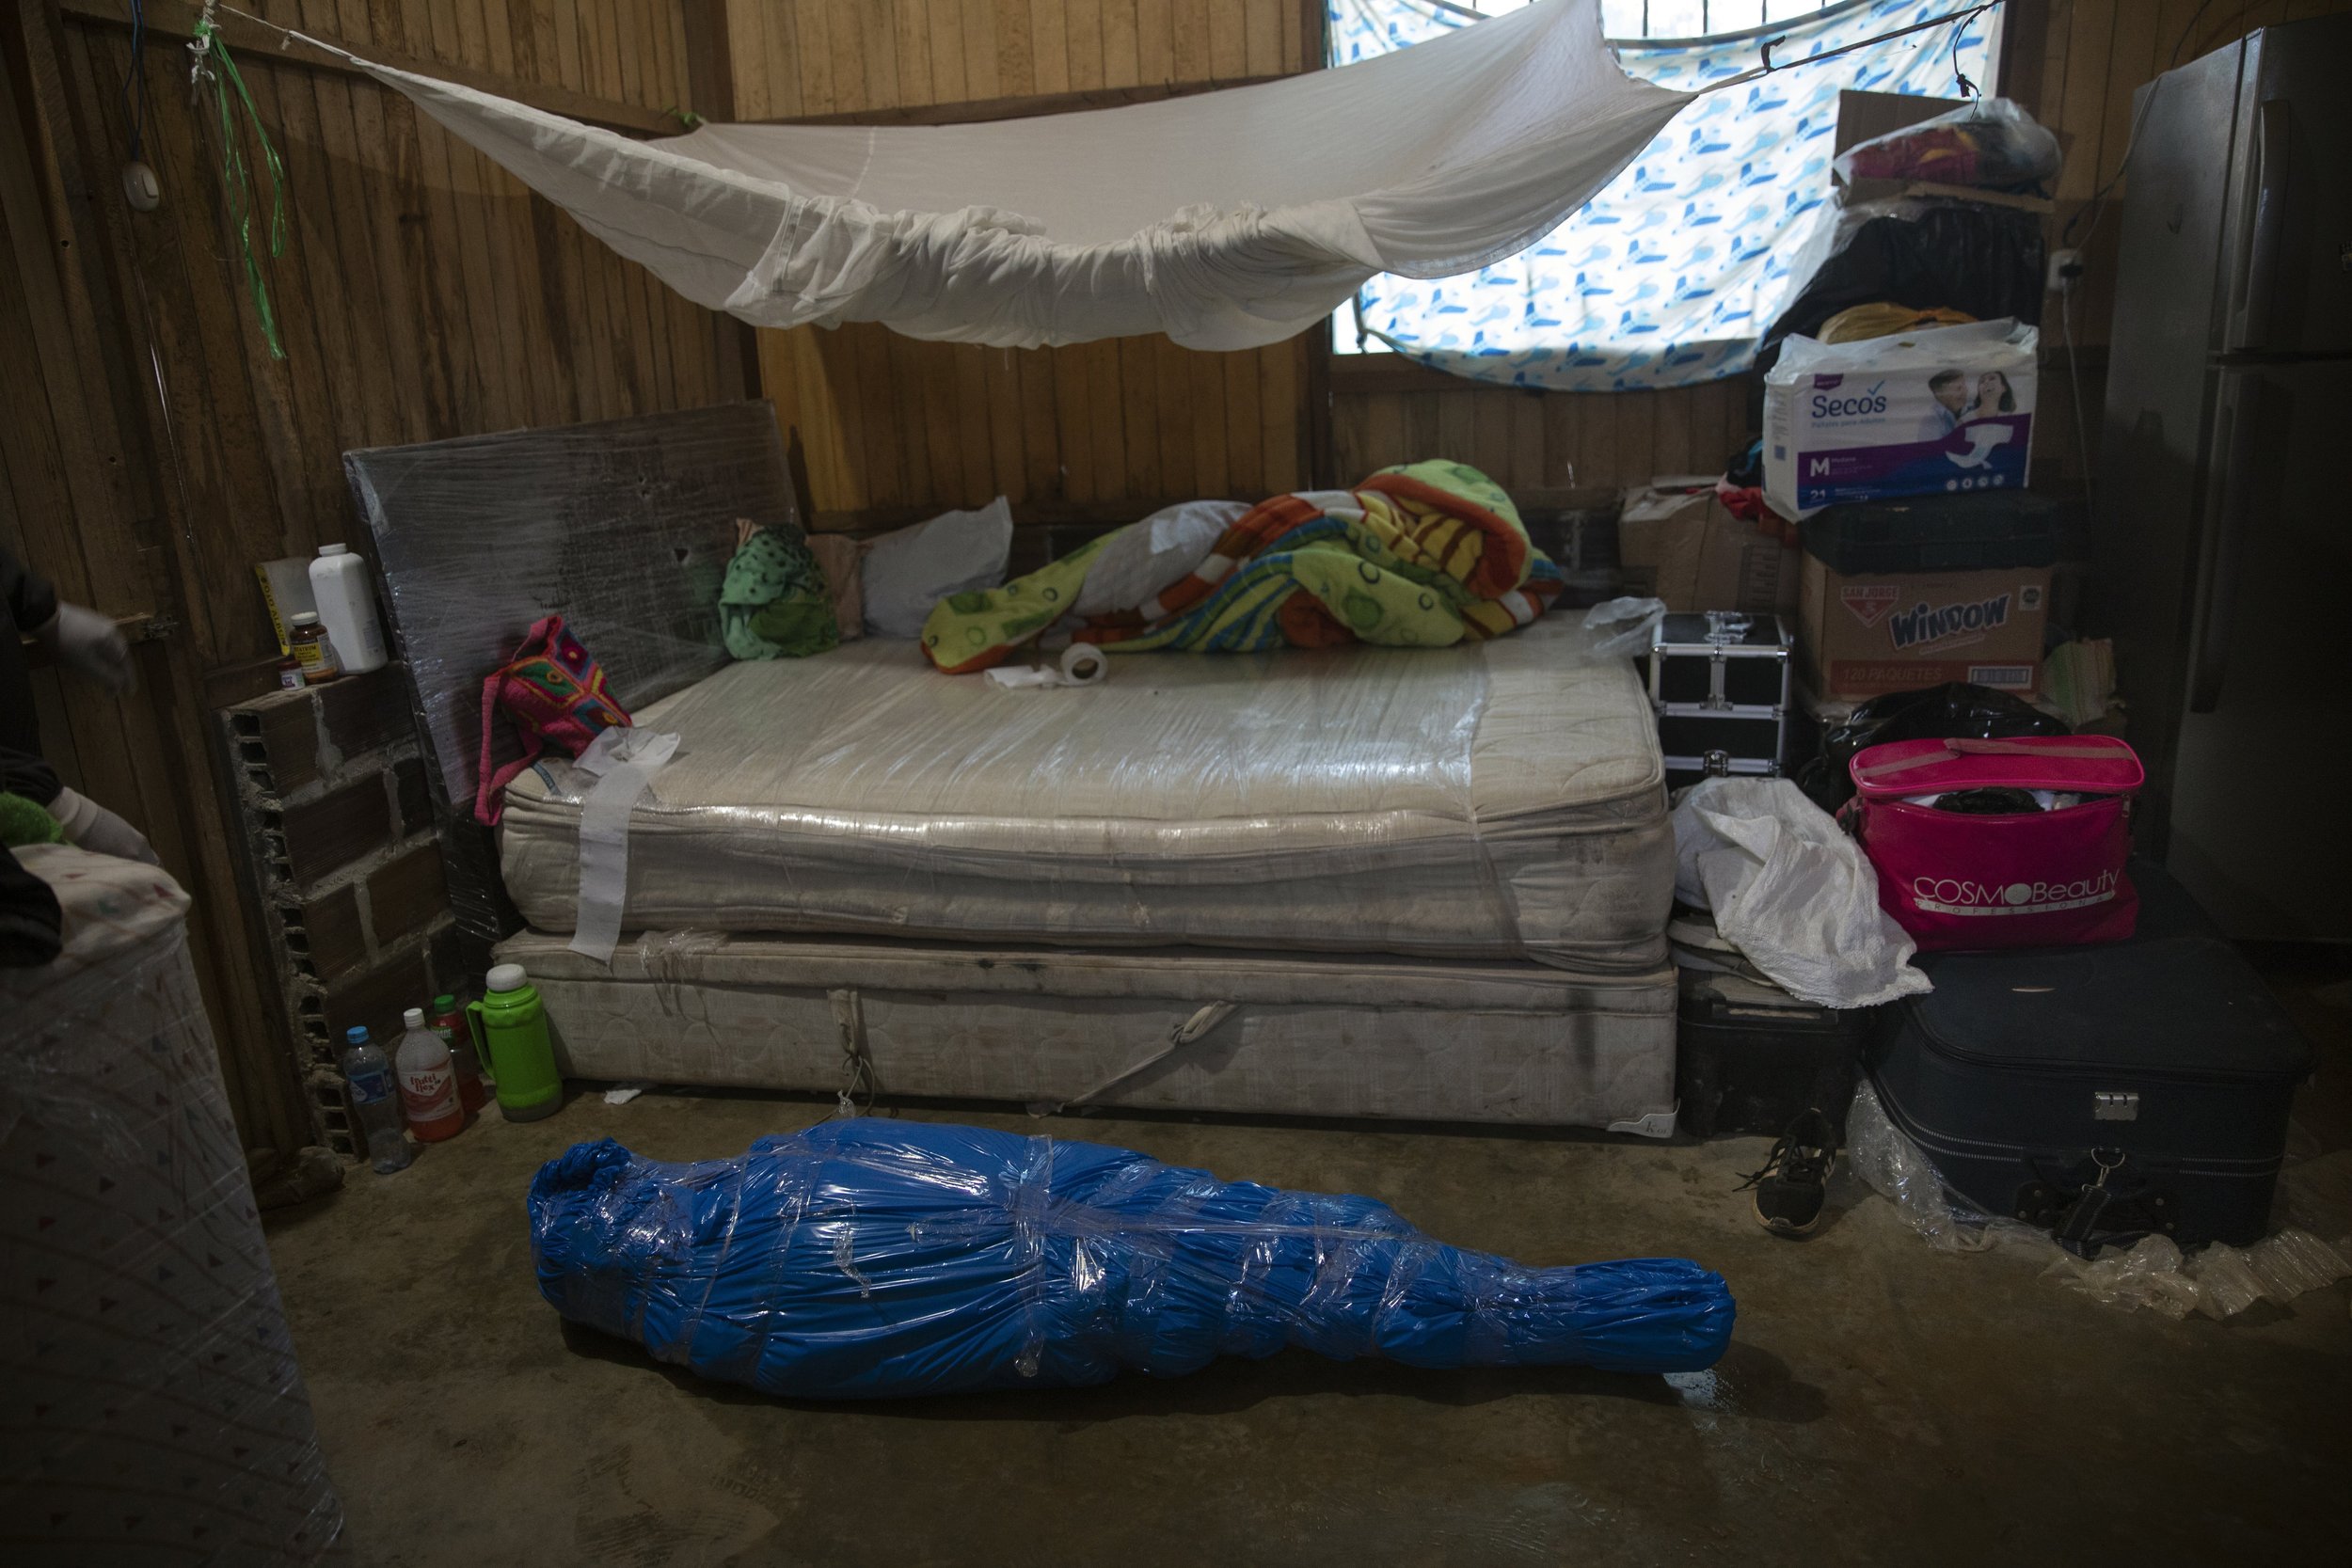  Corazona Pena's body lies wrapped in plastic by a Peruvian COVID-19 specialized government team in Pucallpa, in Peru's Ucayali region, Tuesday, Sept. 29, 2020. (AP Photo/Rodrigo Abd) 